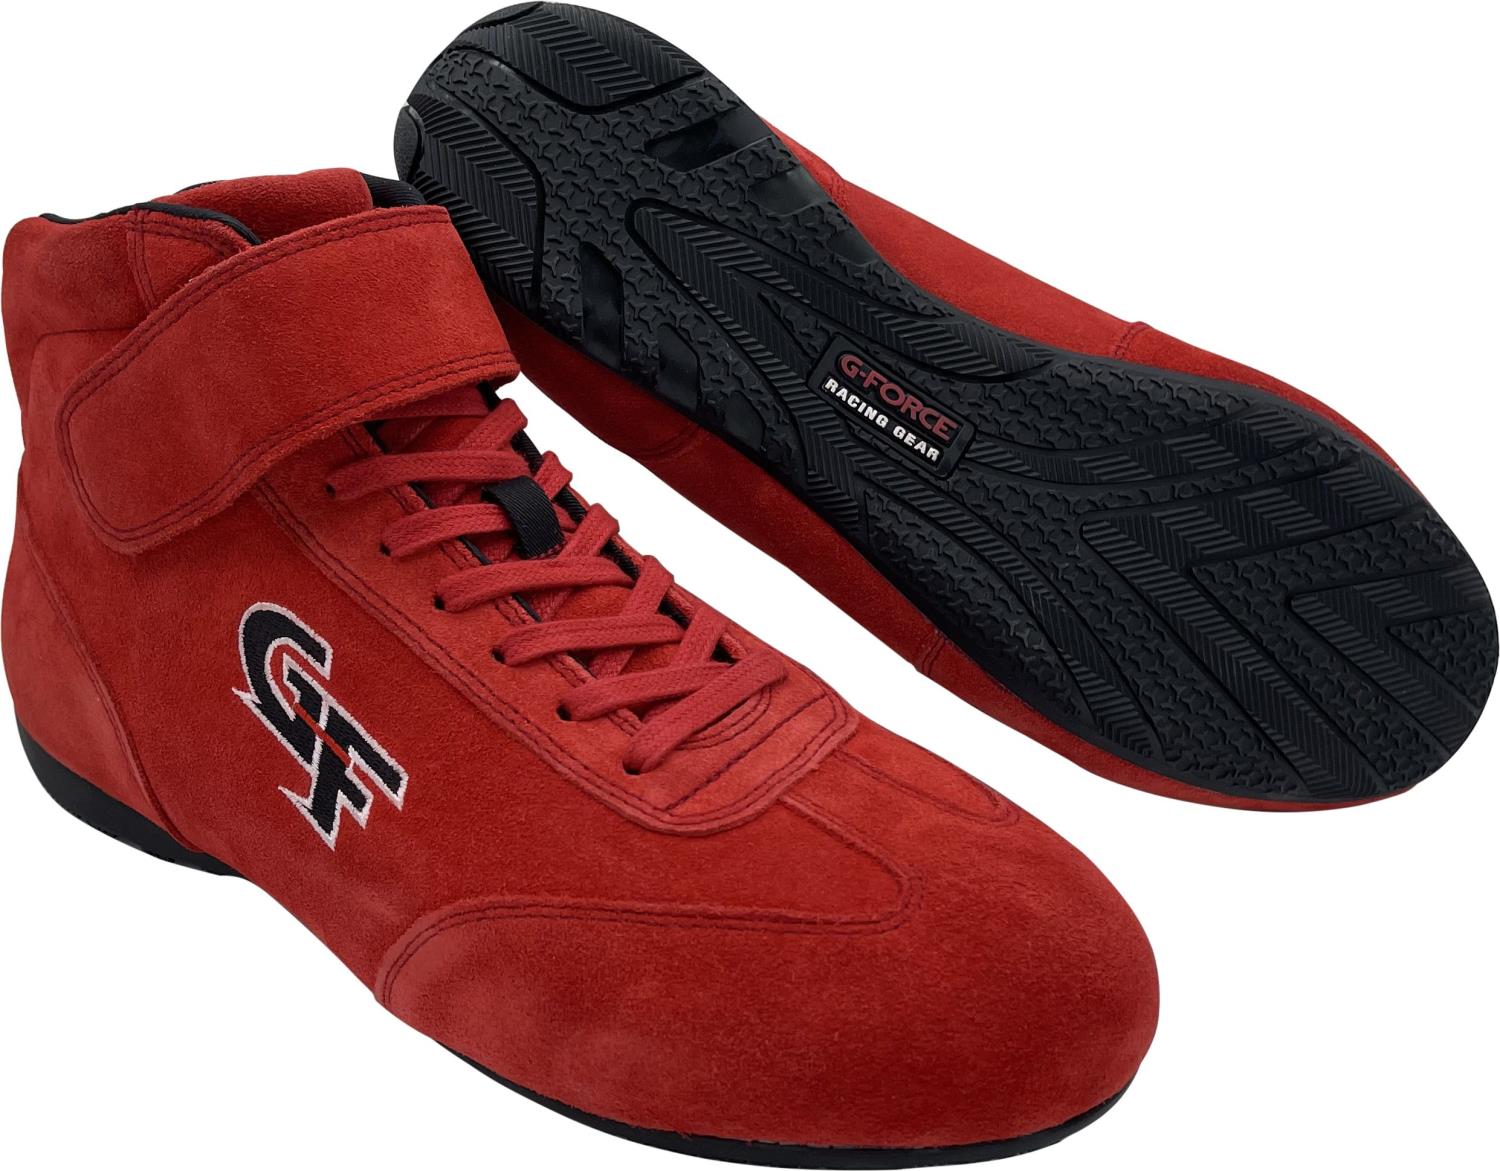 G-Force G35 Racing Shoes